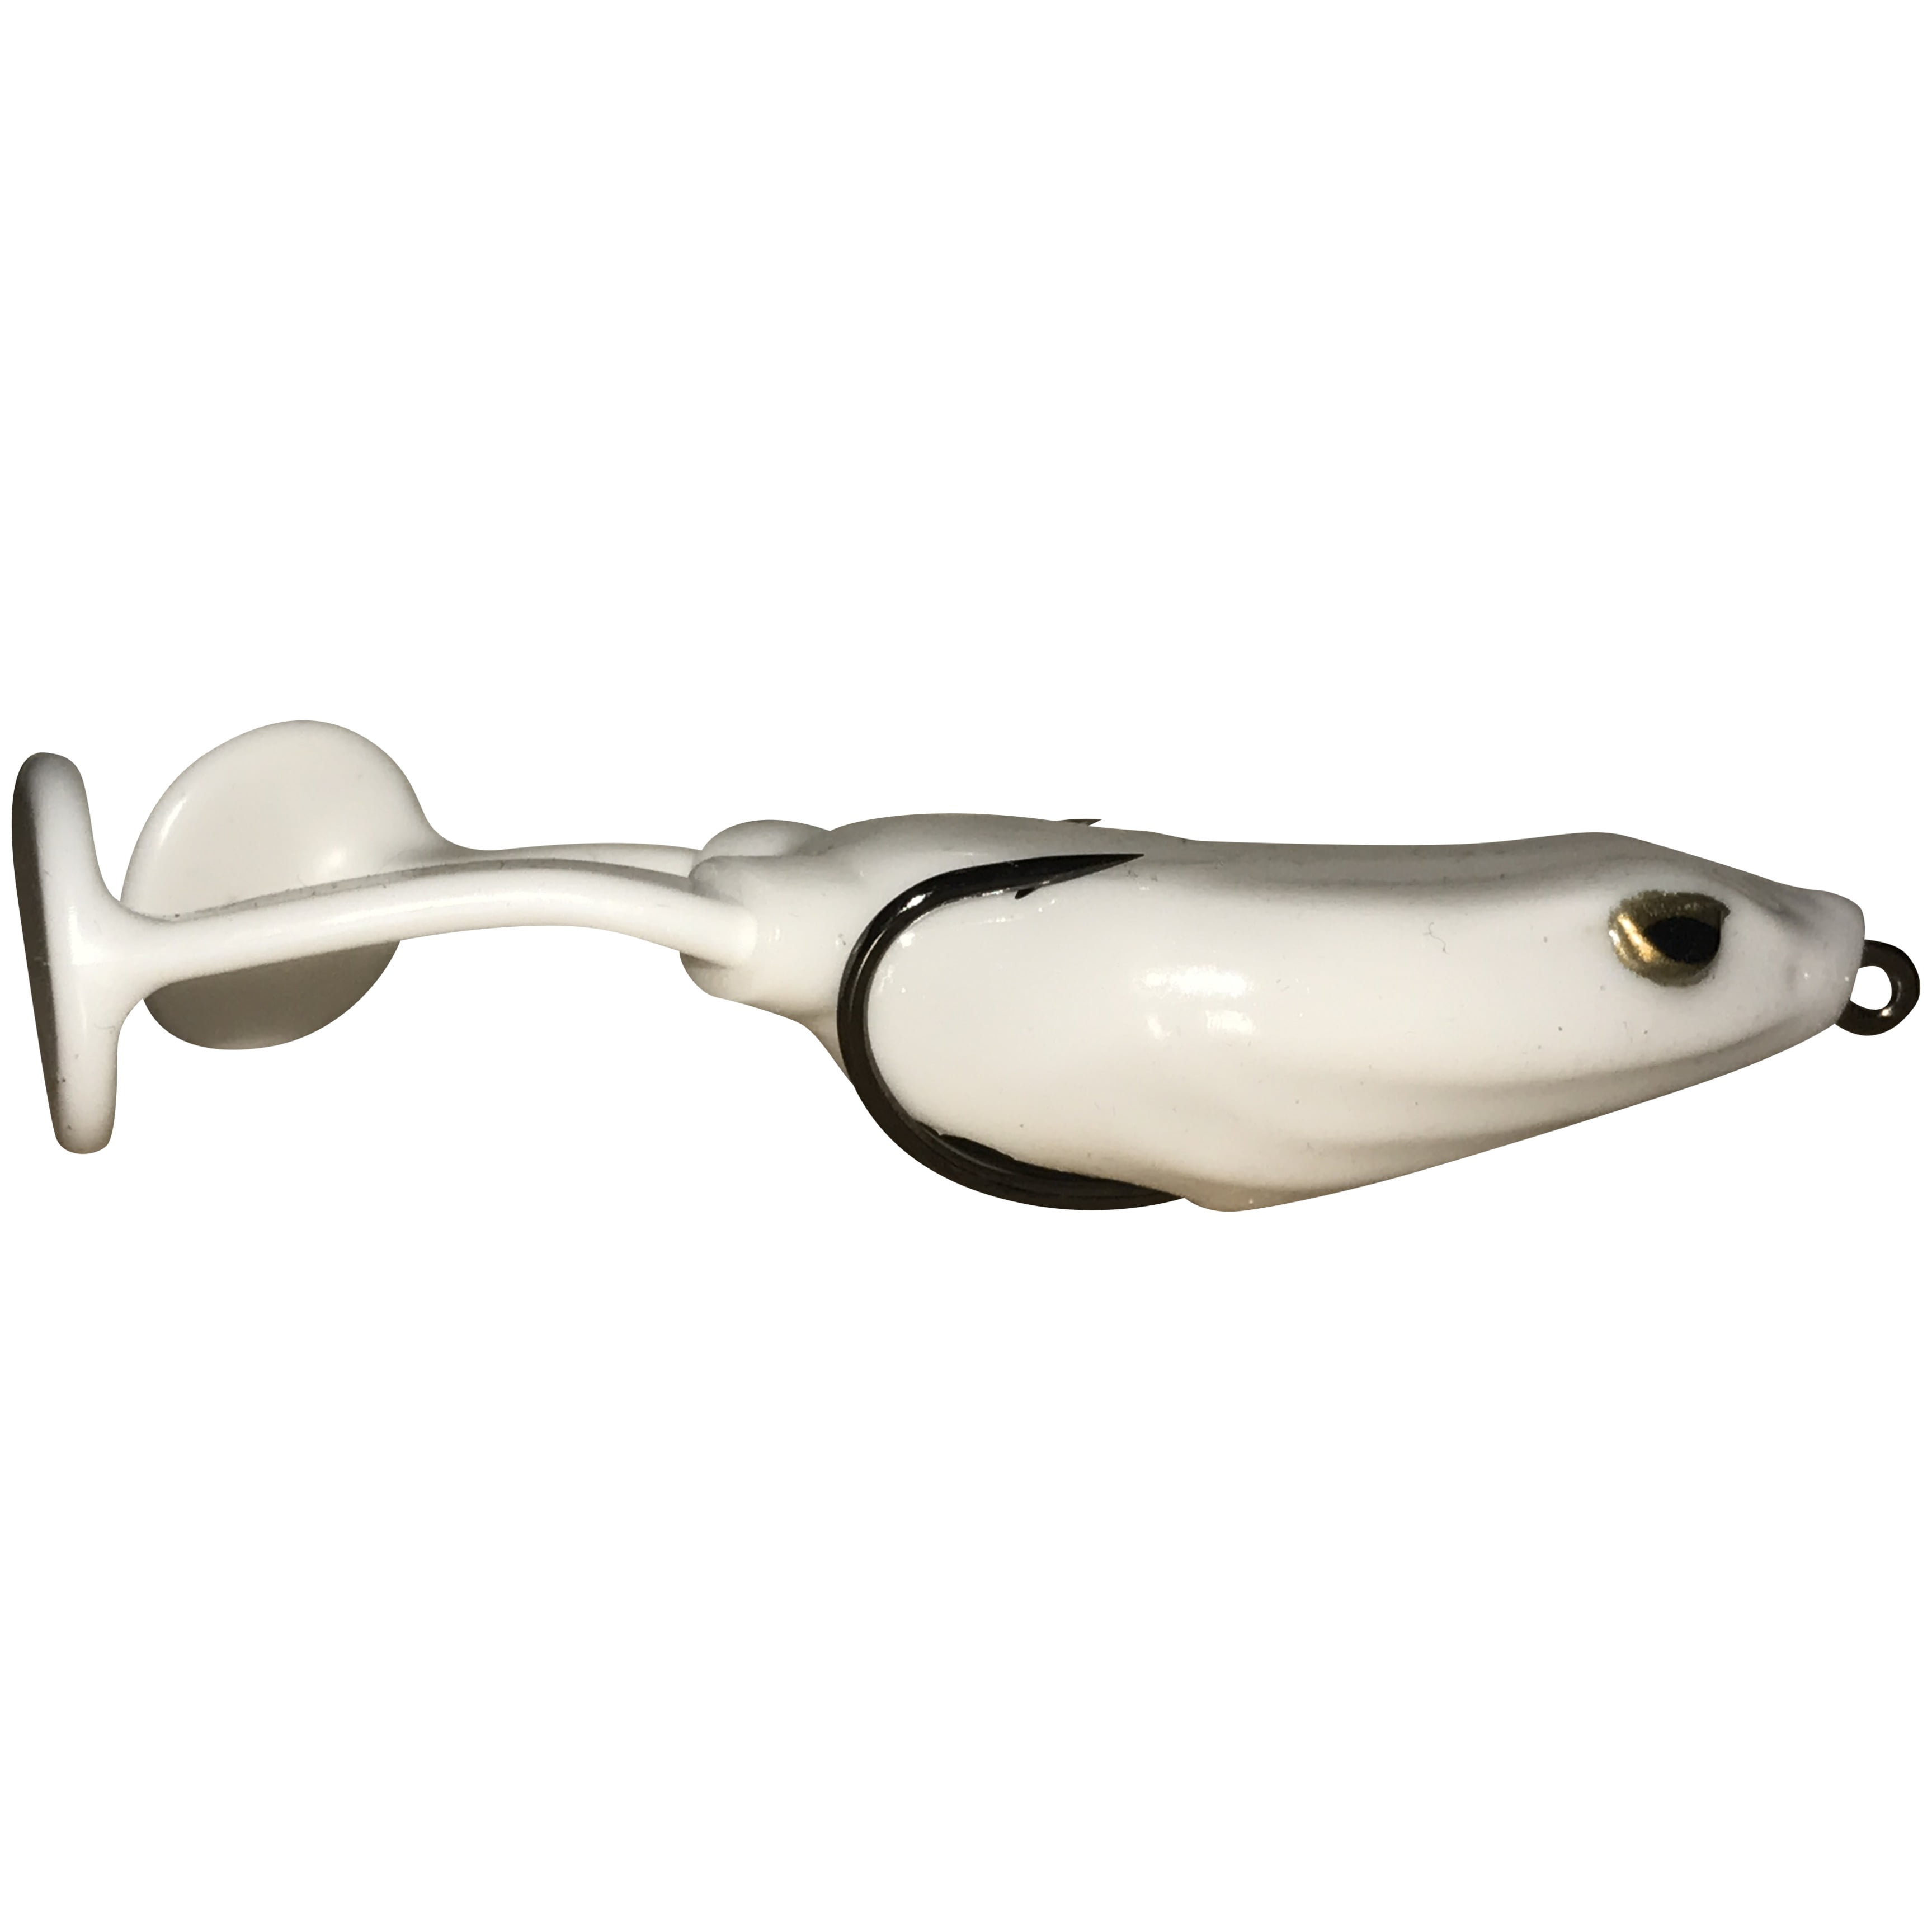 White Rattler - hollow body frog lure 